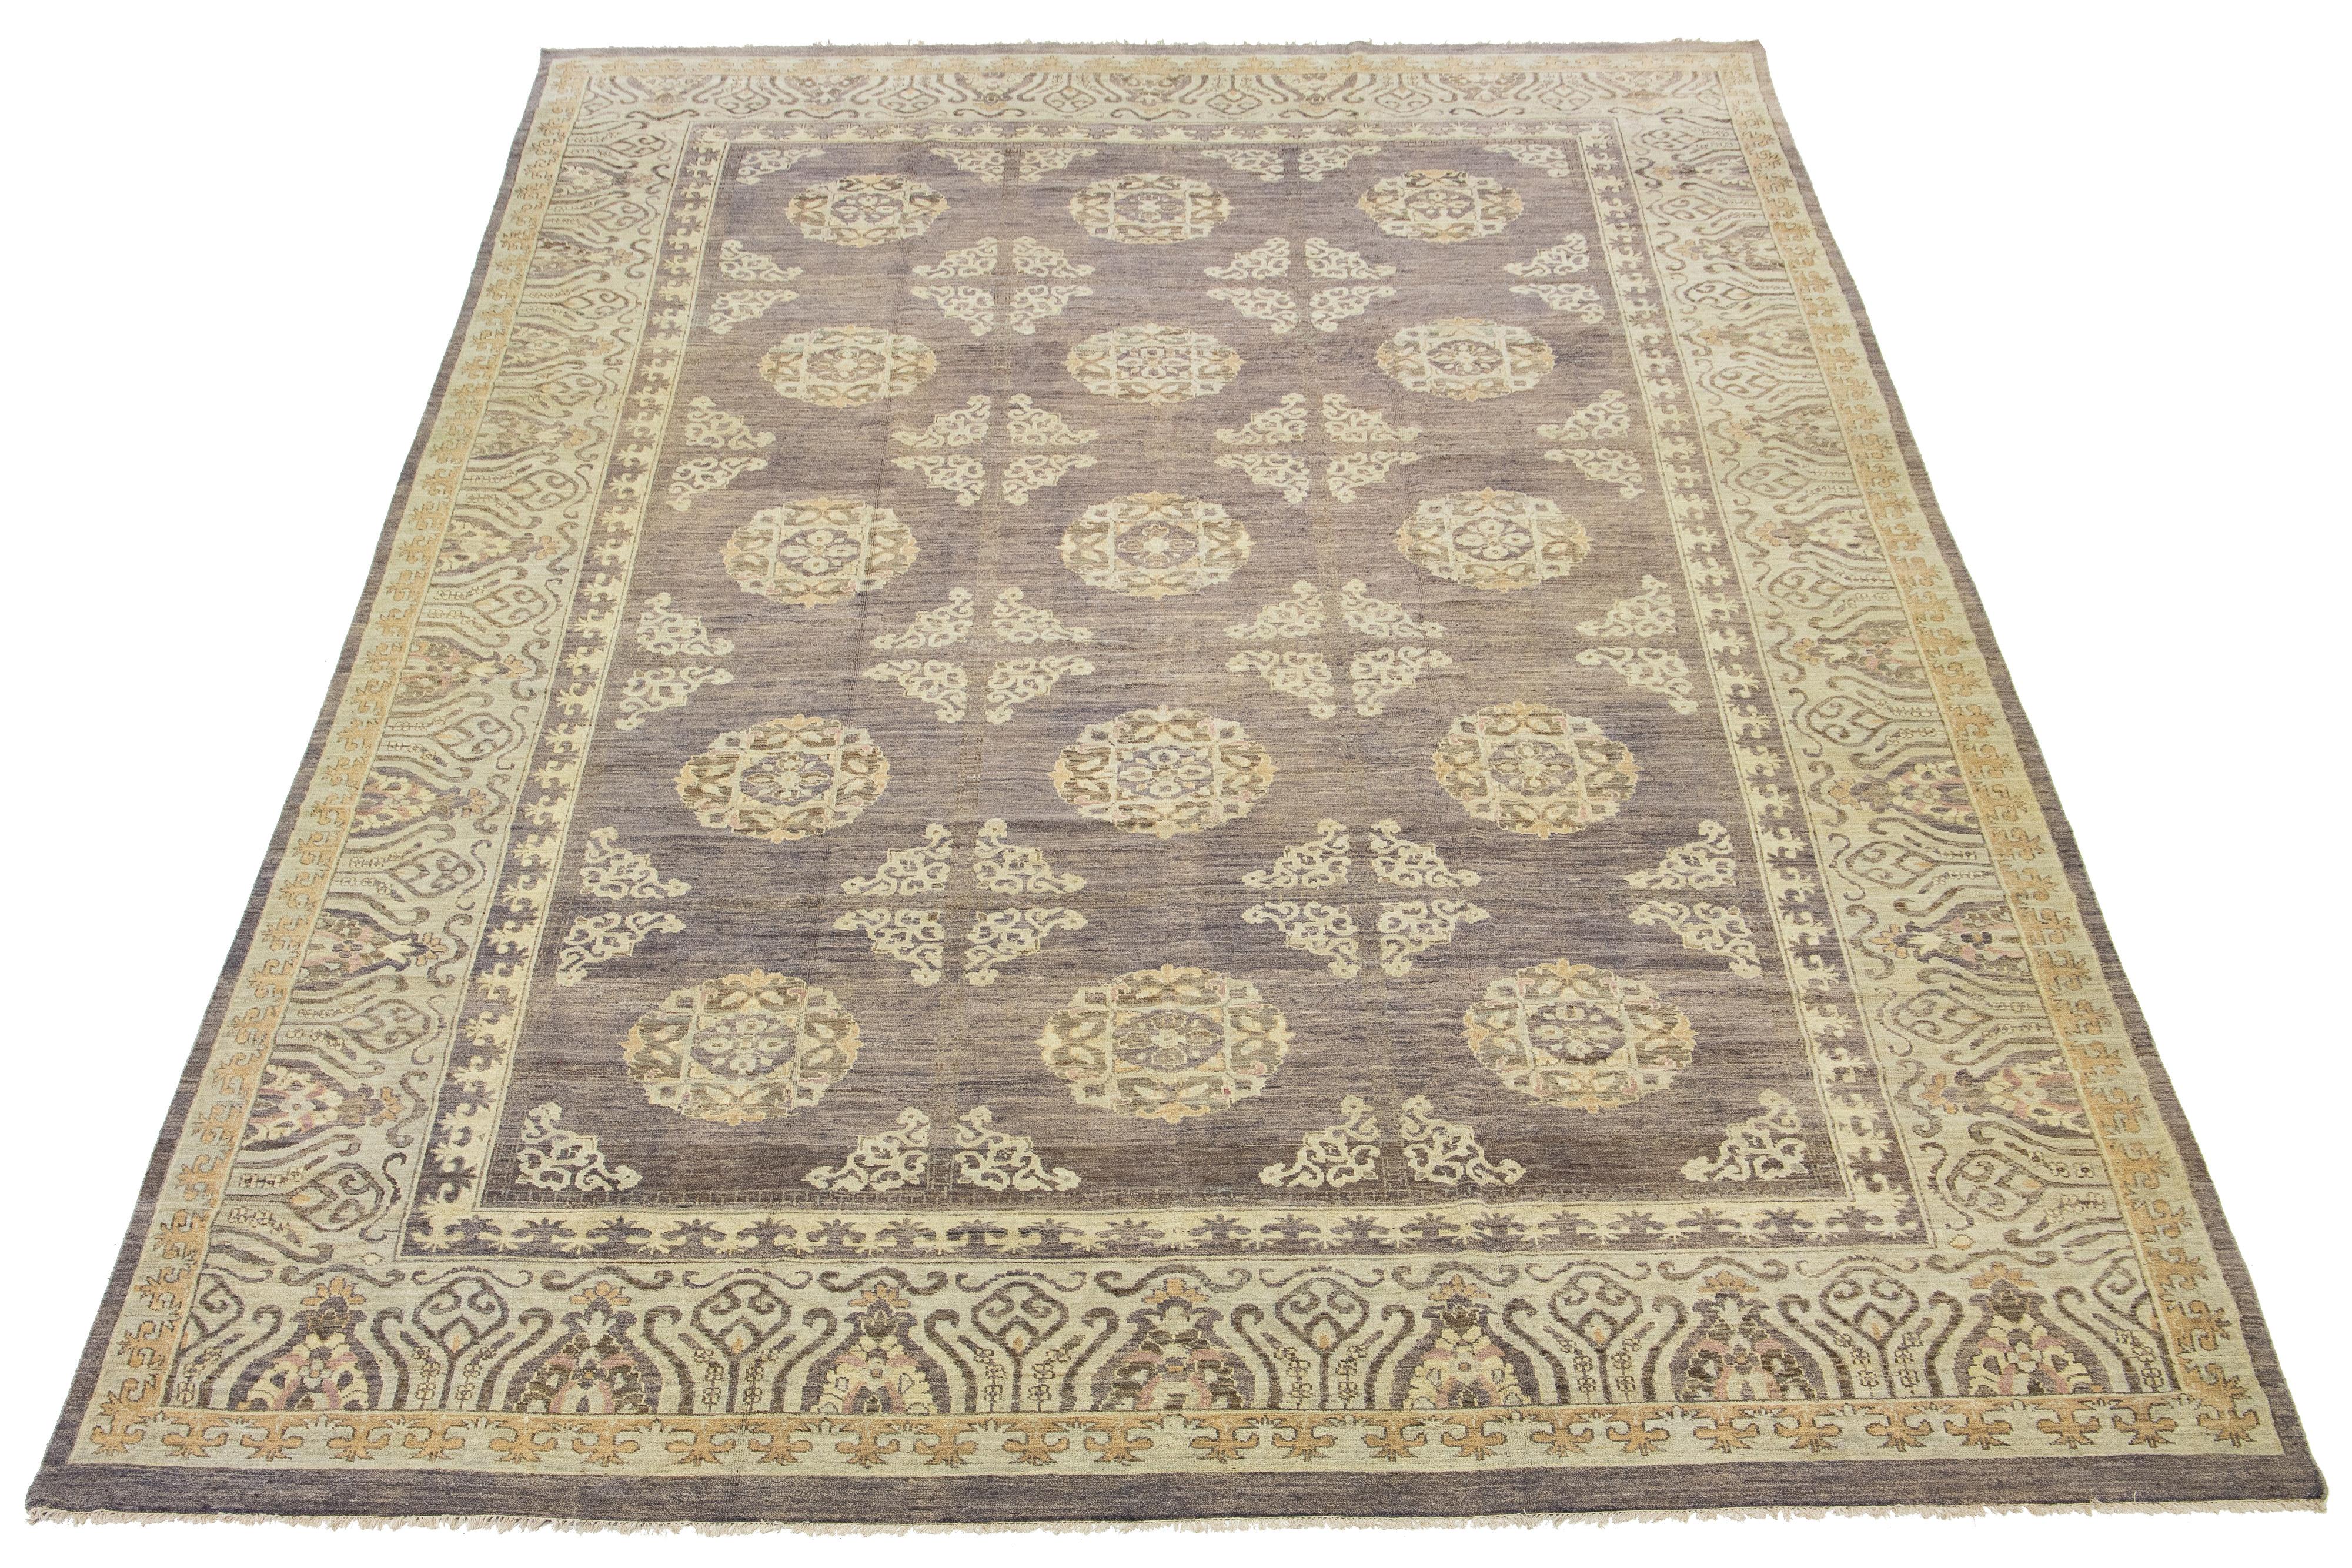 This is an oversized contemporary Khotan wool rug from India. The design showcases a brown and blue field with beige, cream-colored patterns. These include eye-catching floral patterns.

This rug measures 12' x 17'9